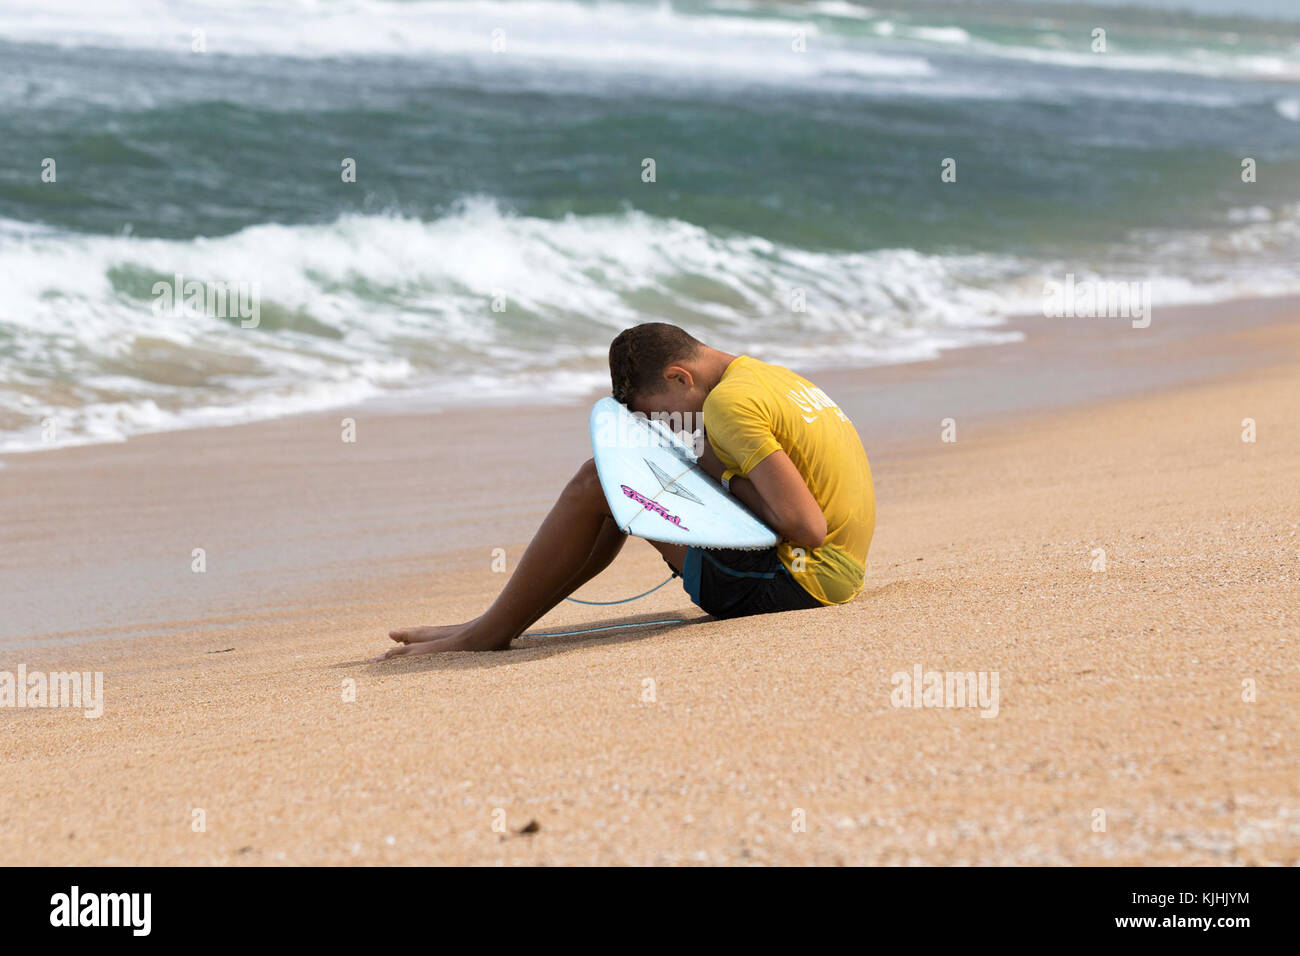 SAN JUAN, Puerto Rico — A local teen takes a quiet moment prior to his heat in the La Comprita charitable surf competition in Aviones, Puerto Rico, Nov. 11, 2017. The competition is hosted by Agua Salá Ministries, founded by Yossua Lugo over six years ago. Agua Salá is a religious outreach program focusing on helping improve Puerto Rican communities through donations and charitable works. Members of the ministry teach regular surf lessons to children, and host the monthly competition. Proceeds from the competition’s entrance fees and merchandise sales go directly to food and clothing donations Stock Photo